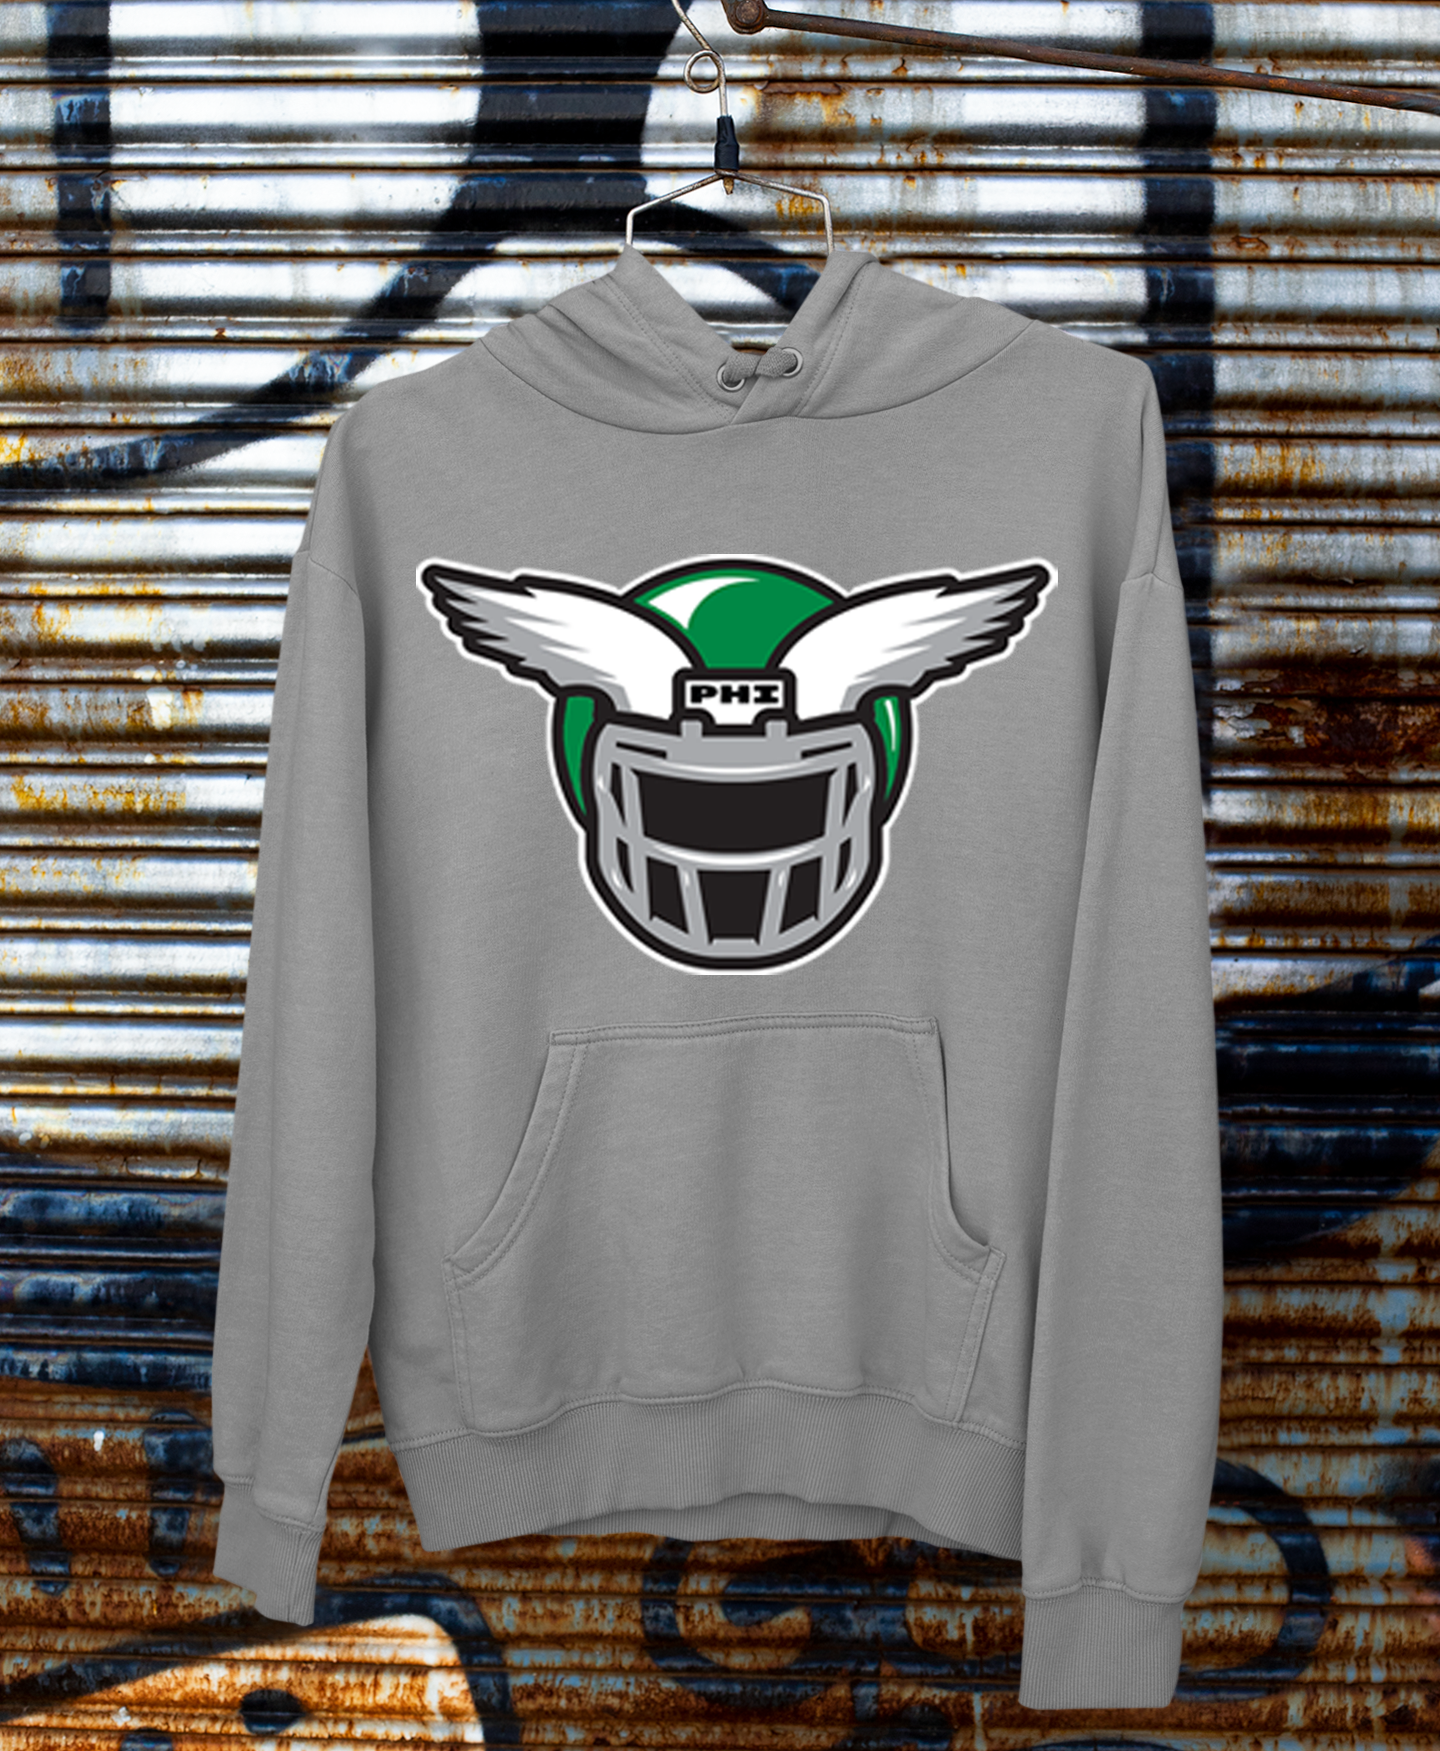 Philadelphia Eagles Playoffs Are For The Birds T-shirt,Sweater